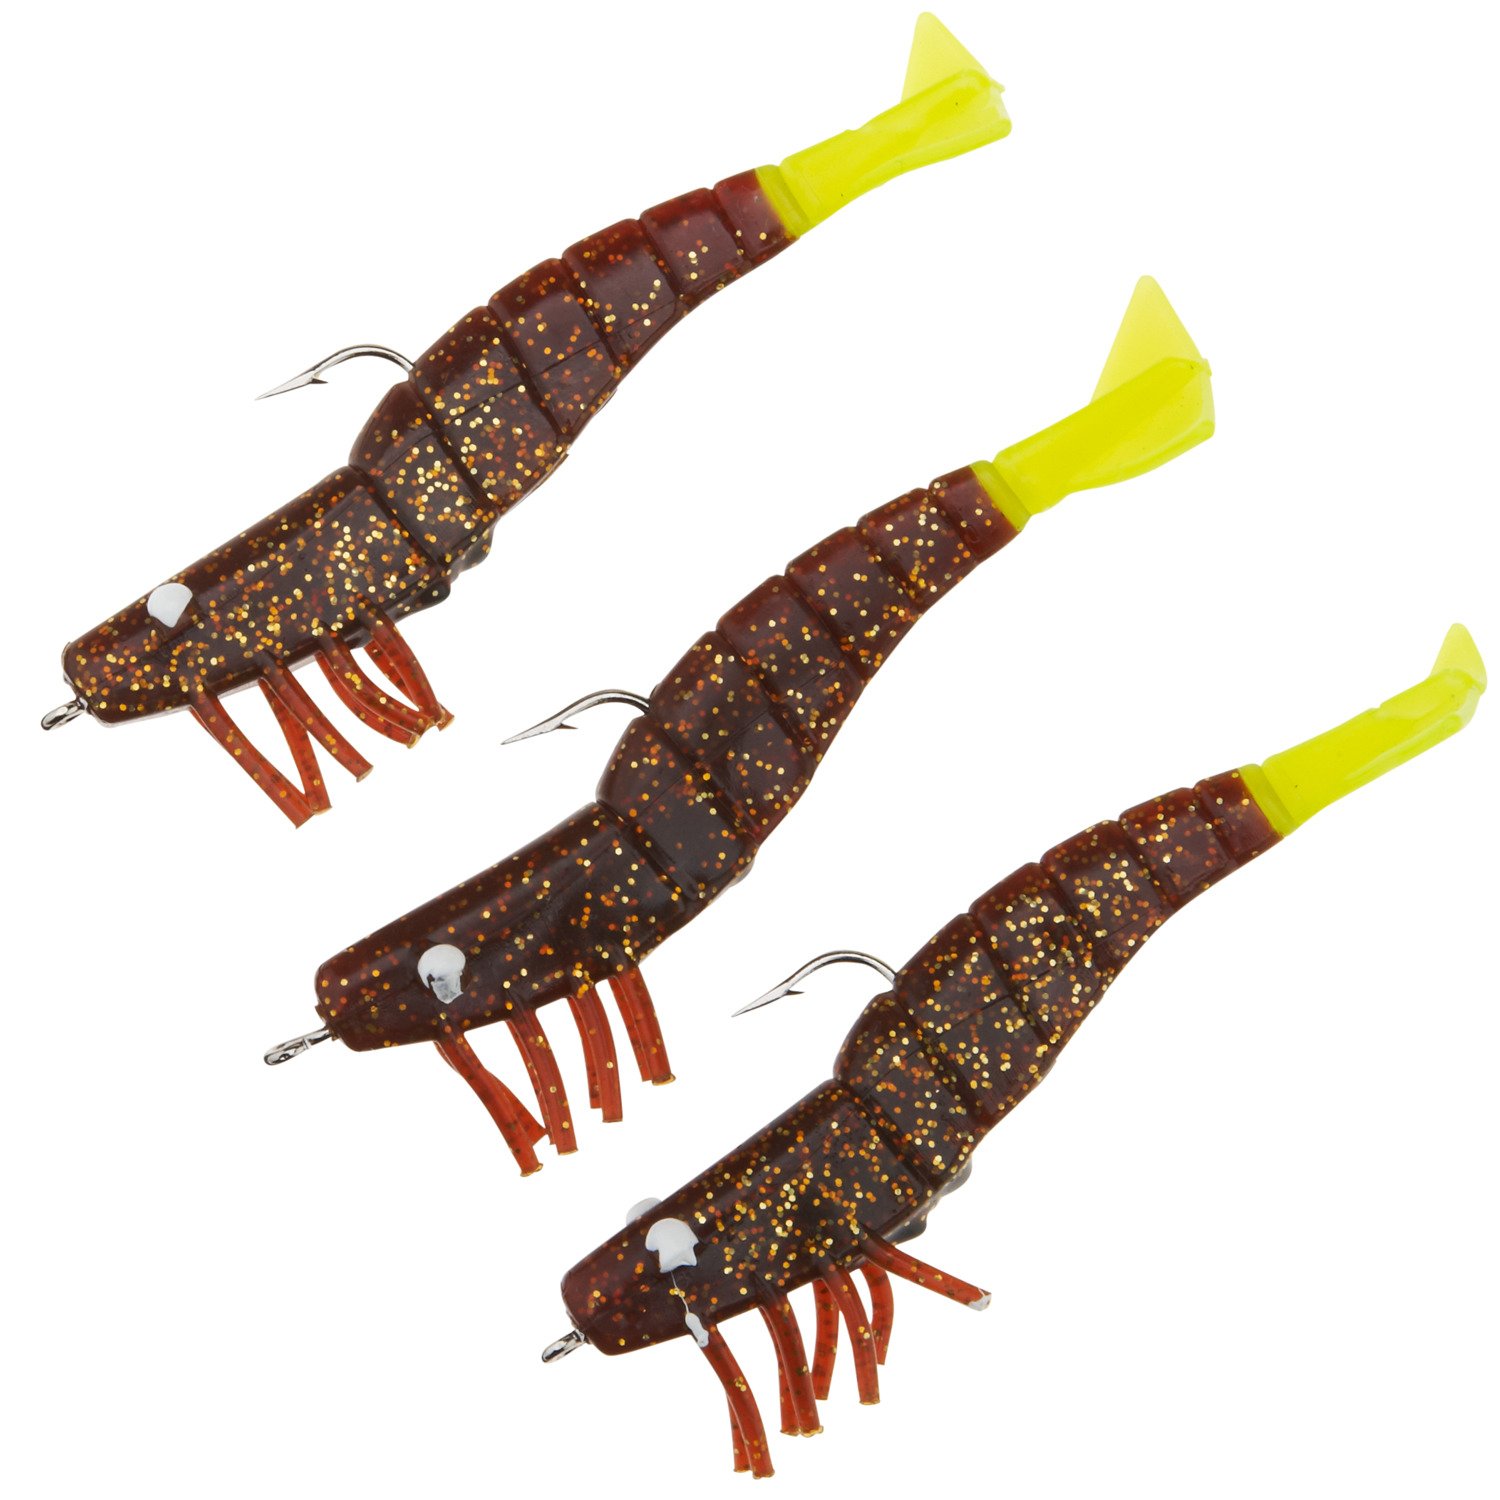 D.O.A. Fishing Lures 3 in Standard Shrimp Rigged Plastic Swimbaits